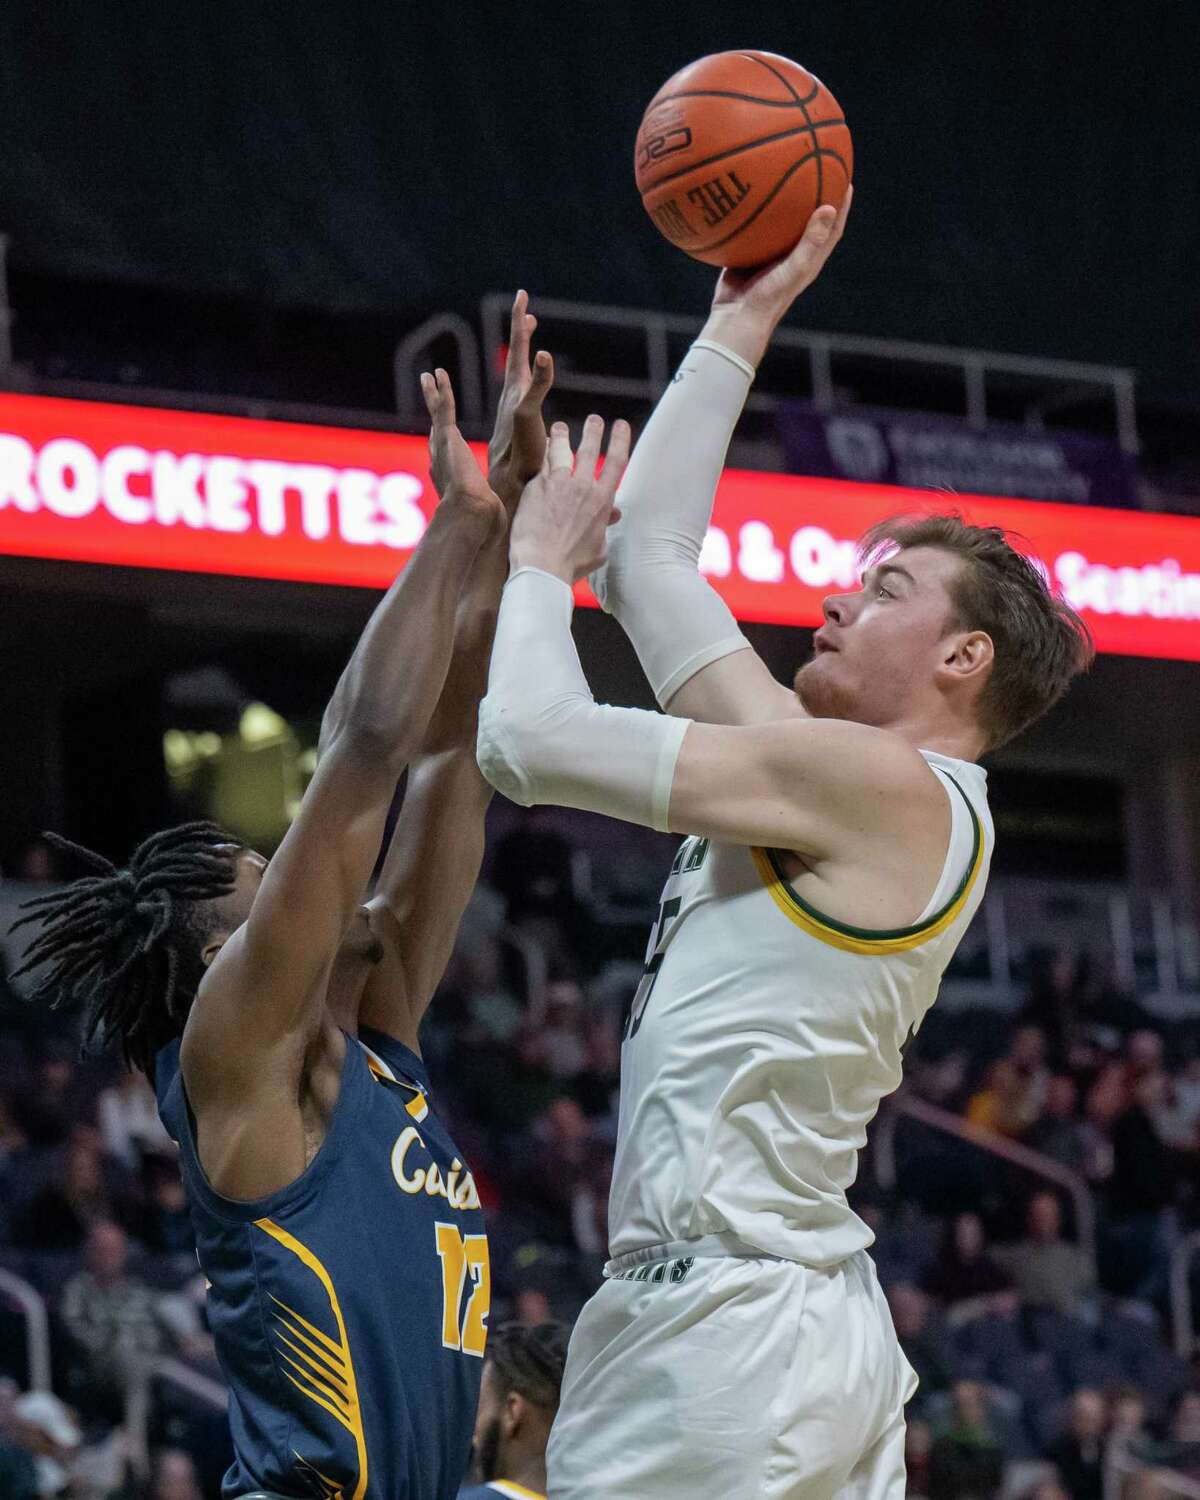 Siena graduate student Jackson Stormo takes a jump hook over Canisius junior Bryce Okpoh during the Metro Atlantic Athletic Conference opener on Friday, Dec. 2, 2022, at the MVP Arena in Albany, N.Y. (Jim Franco/Times Union)